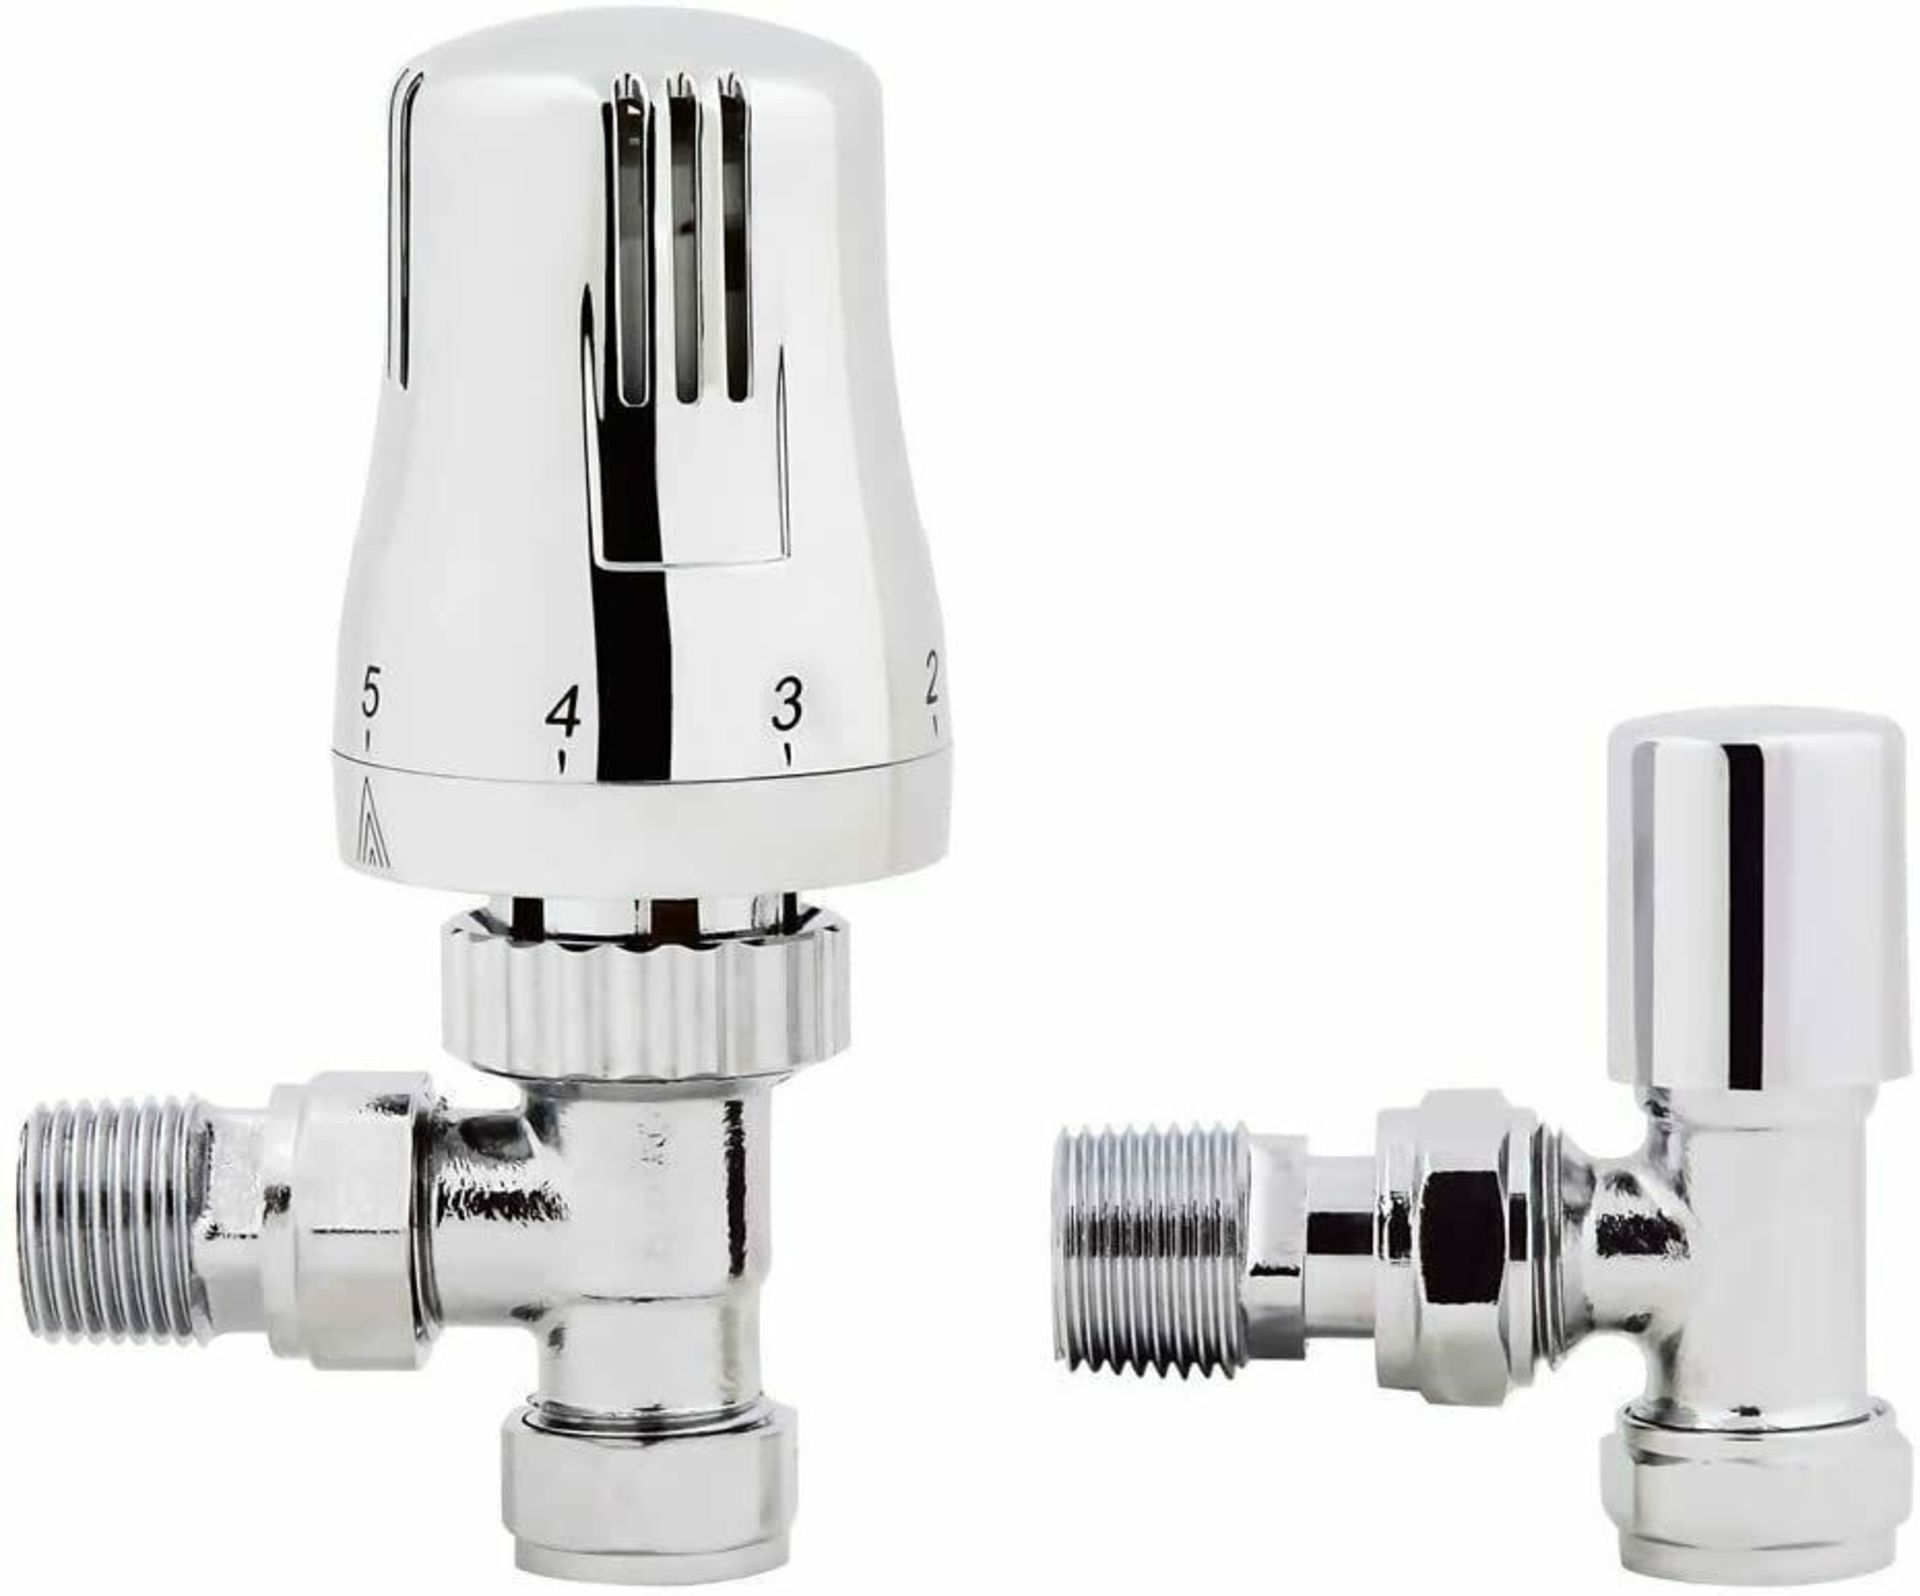 New & Boxed Chrome Thermostatic Control Angled Designer Radiator Valves Pair 15mm New. RRP £49.99